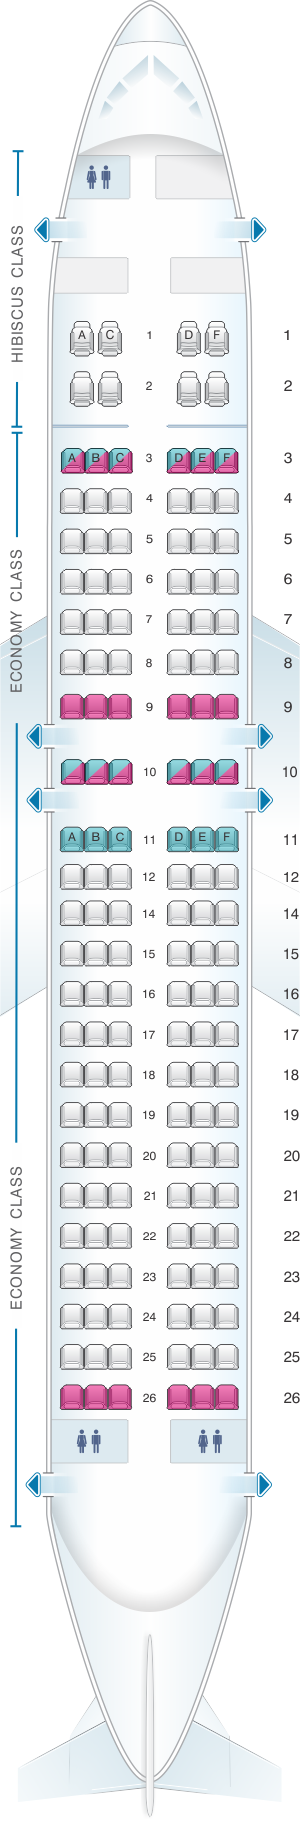 Seat map for Aircalin Airbus A320